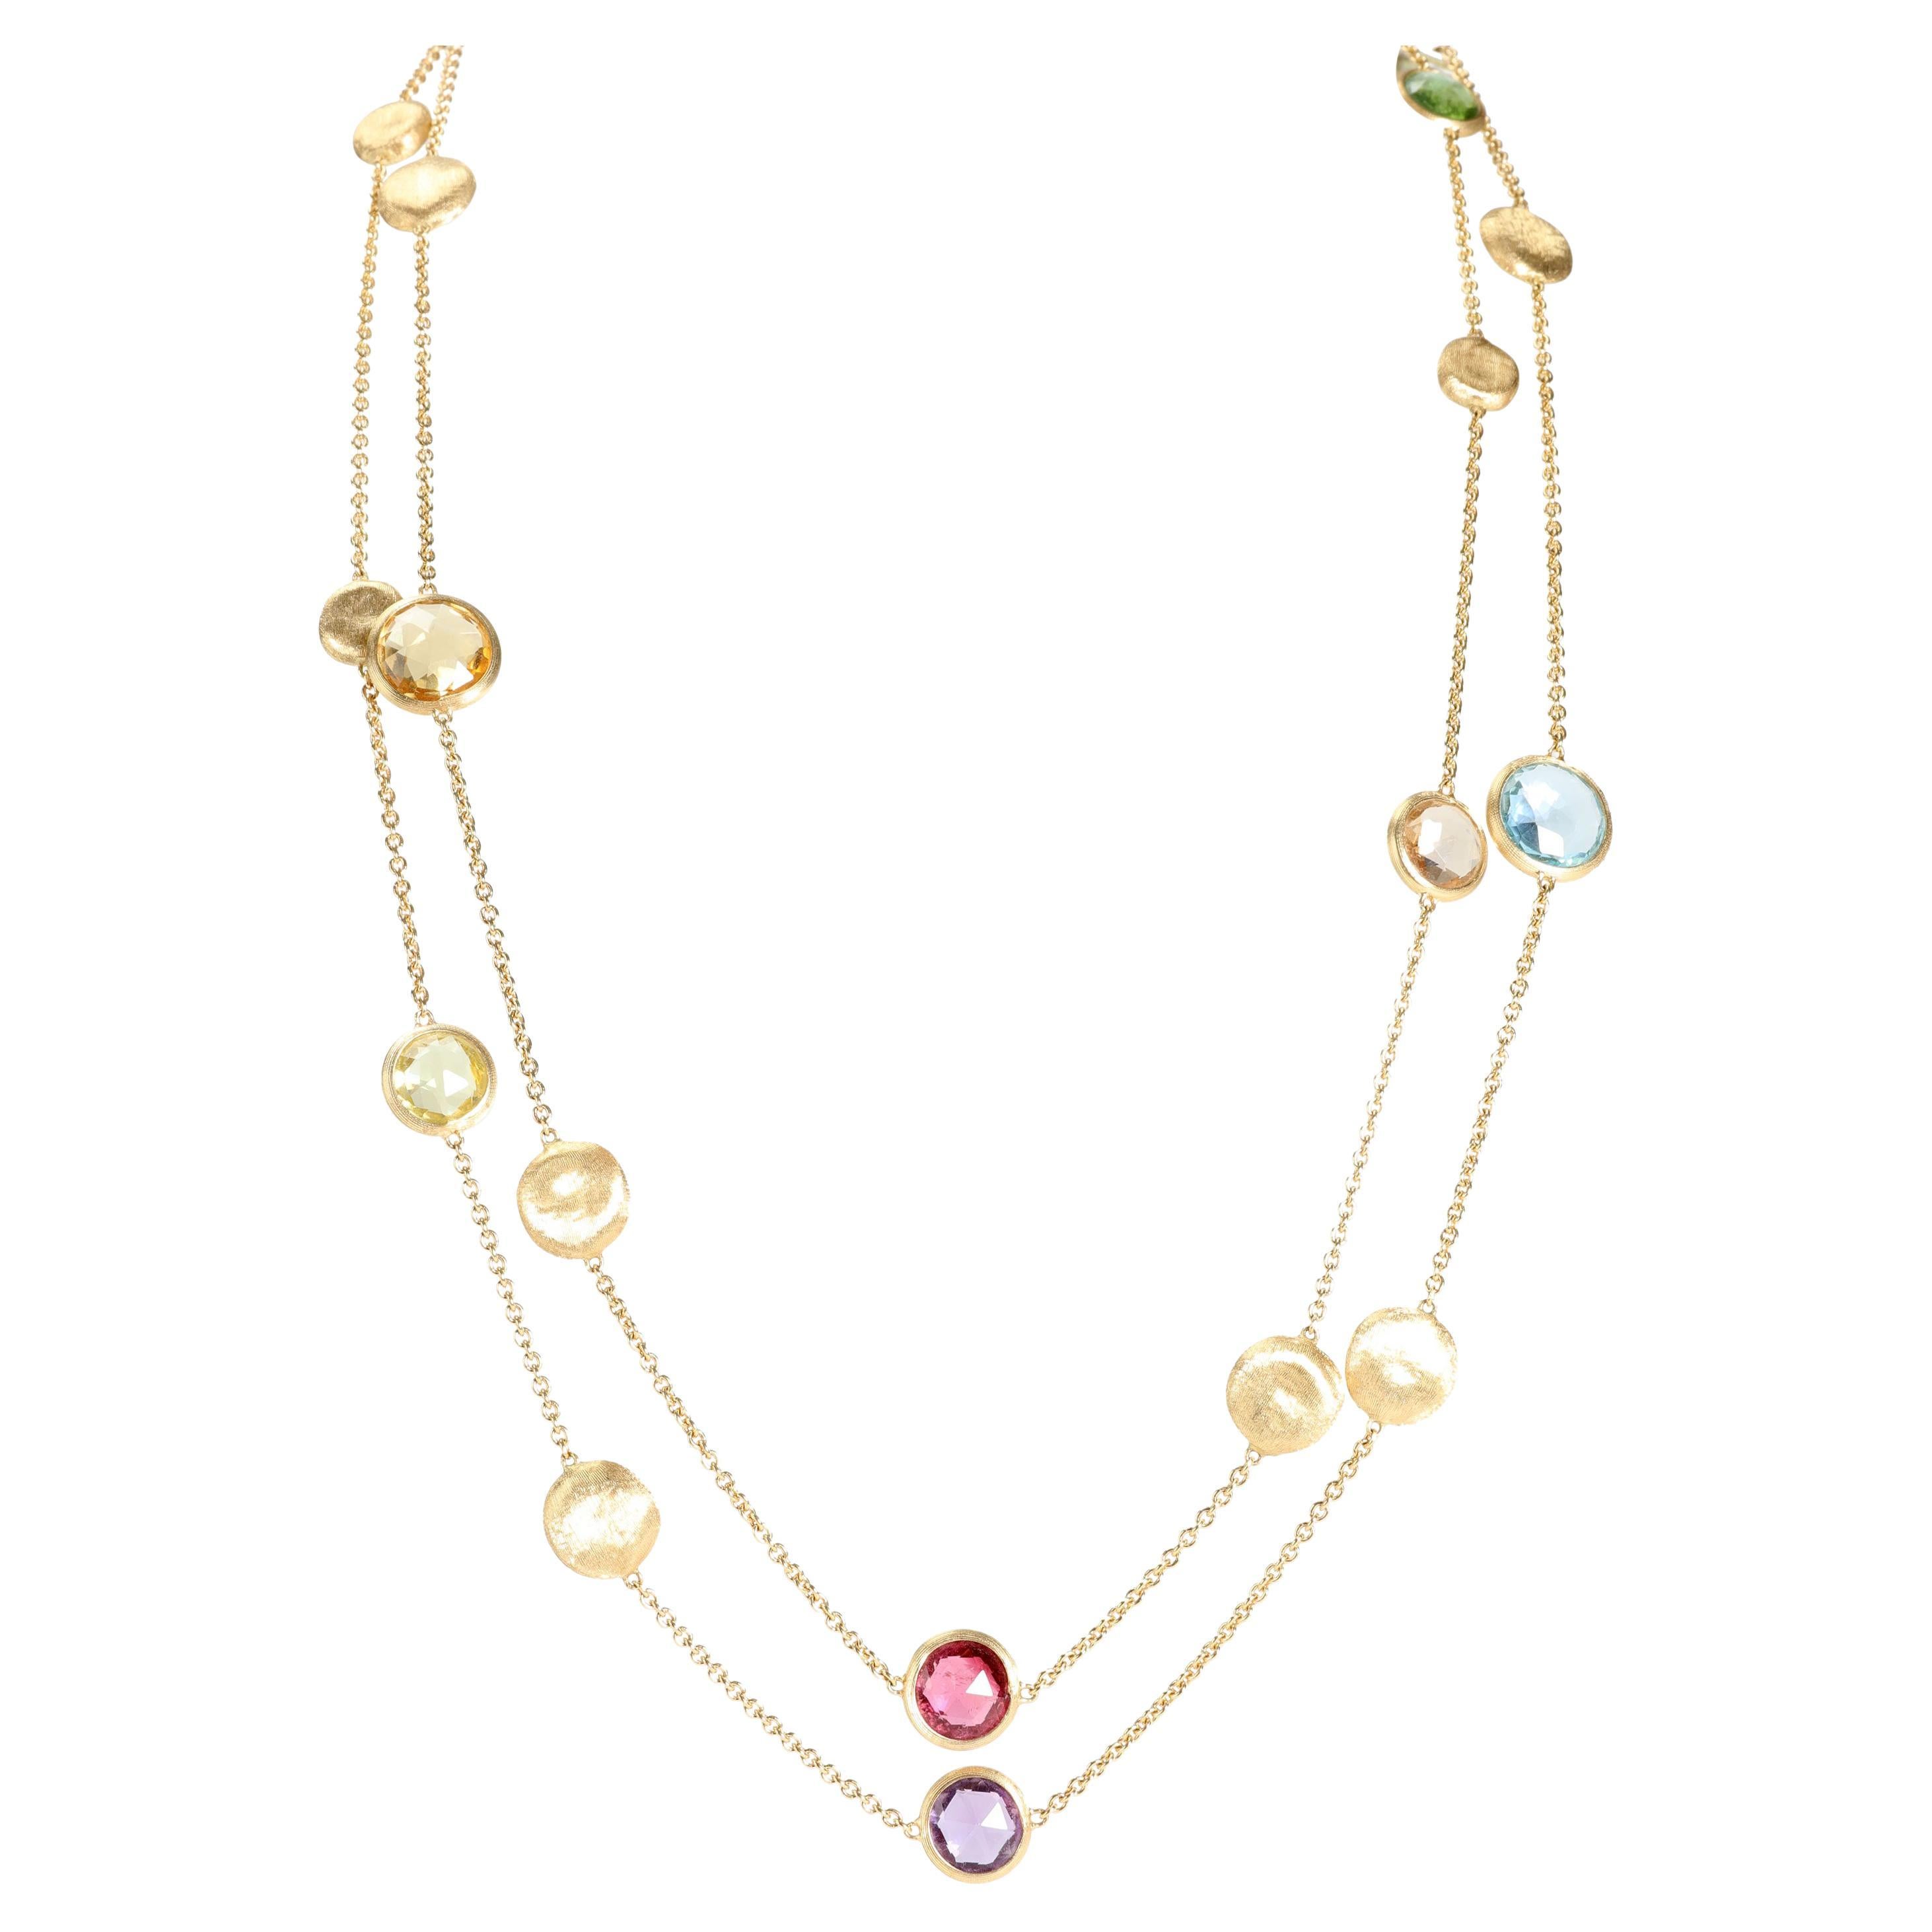 Marco Bicego Jaipur Station Necklace in 18k Yellow Gold